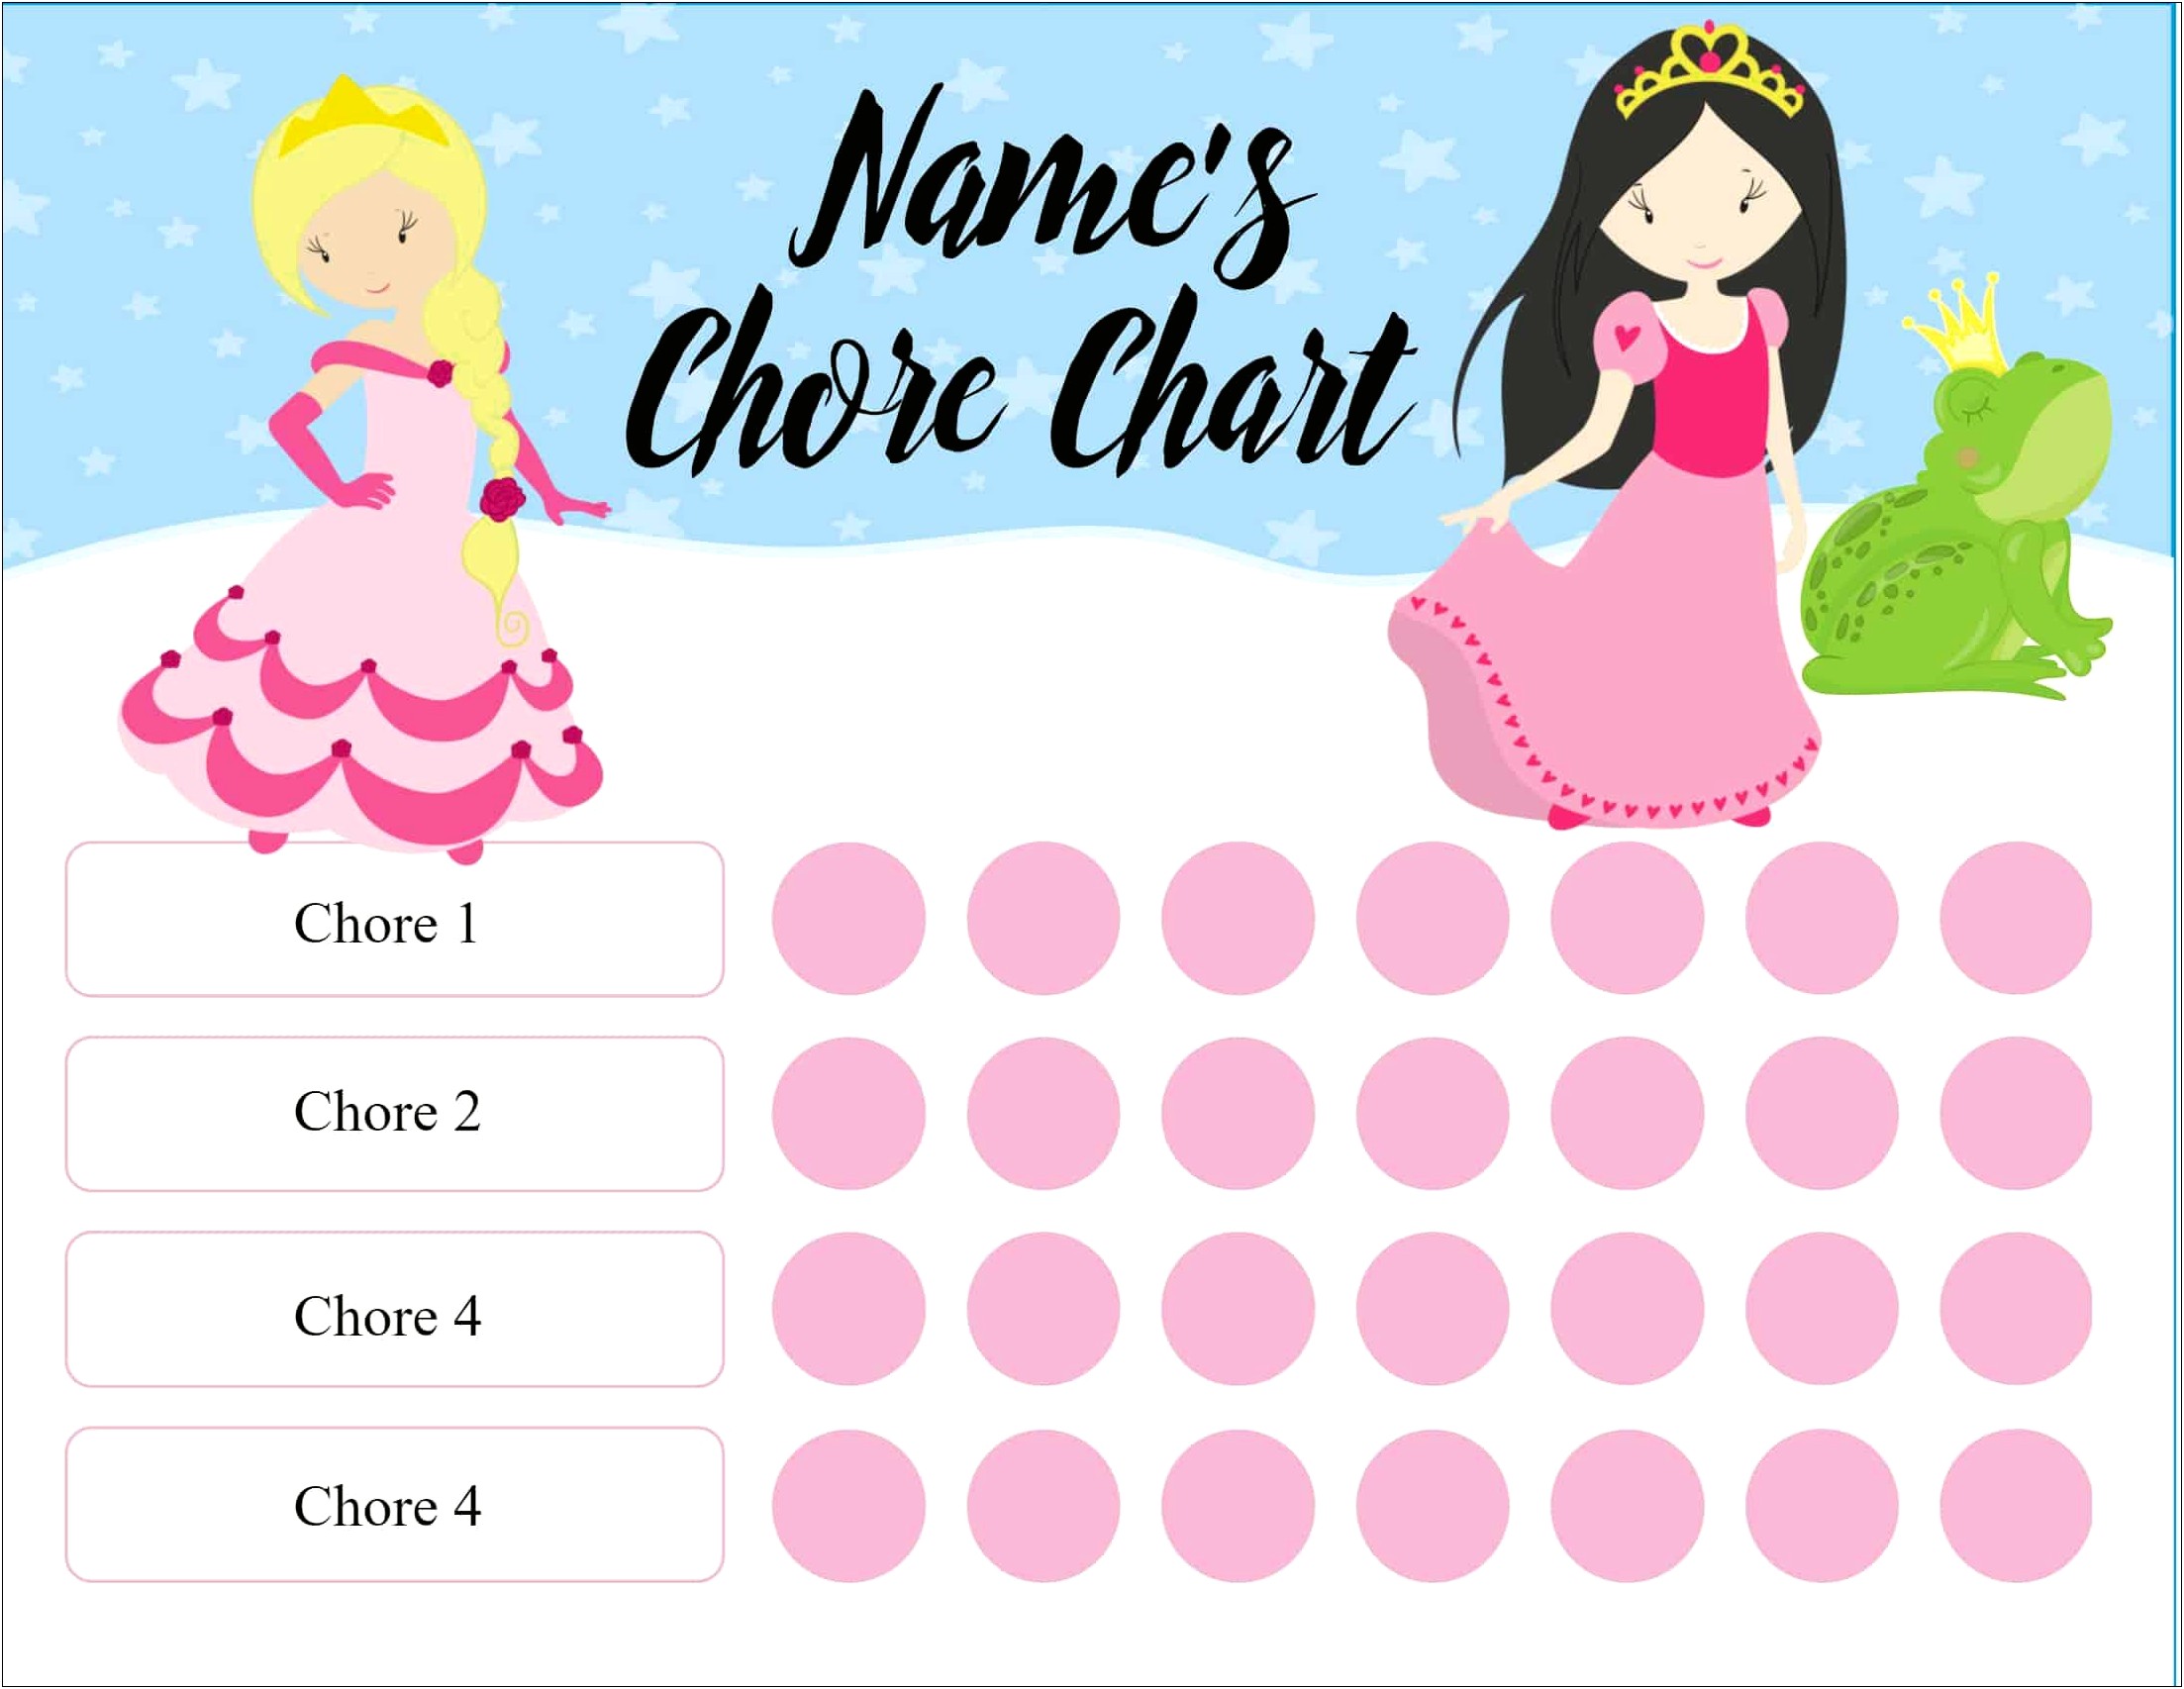 Free Printable Chore Chart Templates For Adults